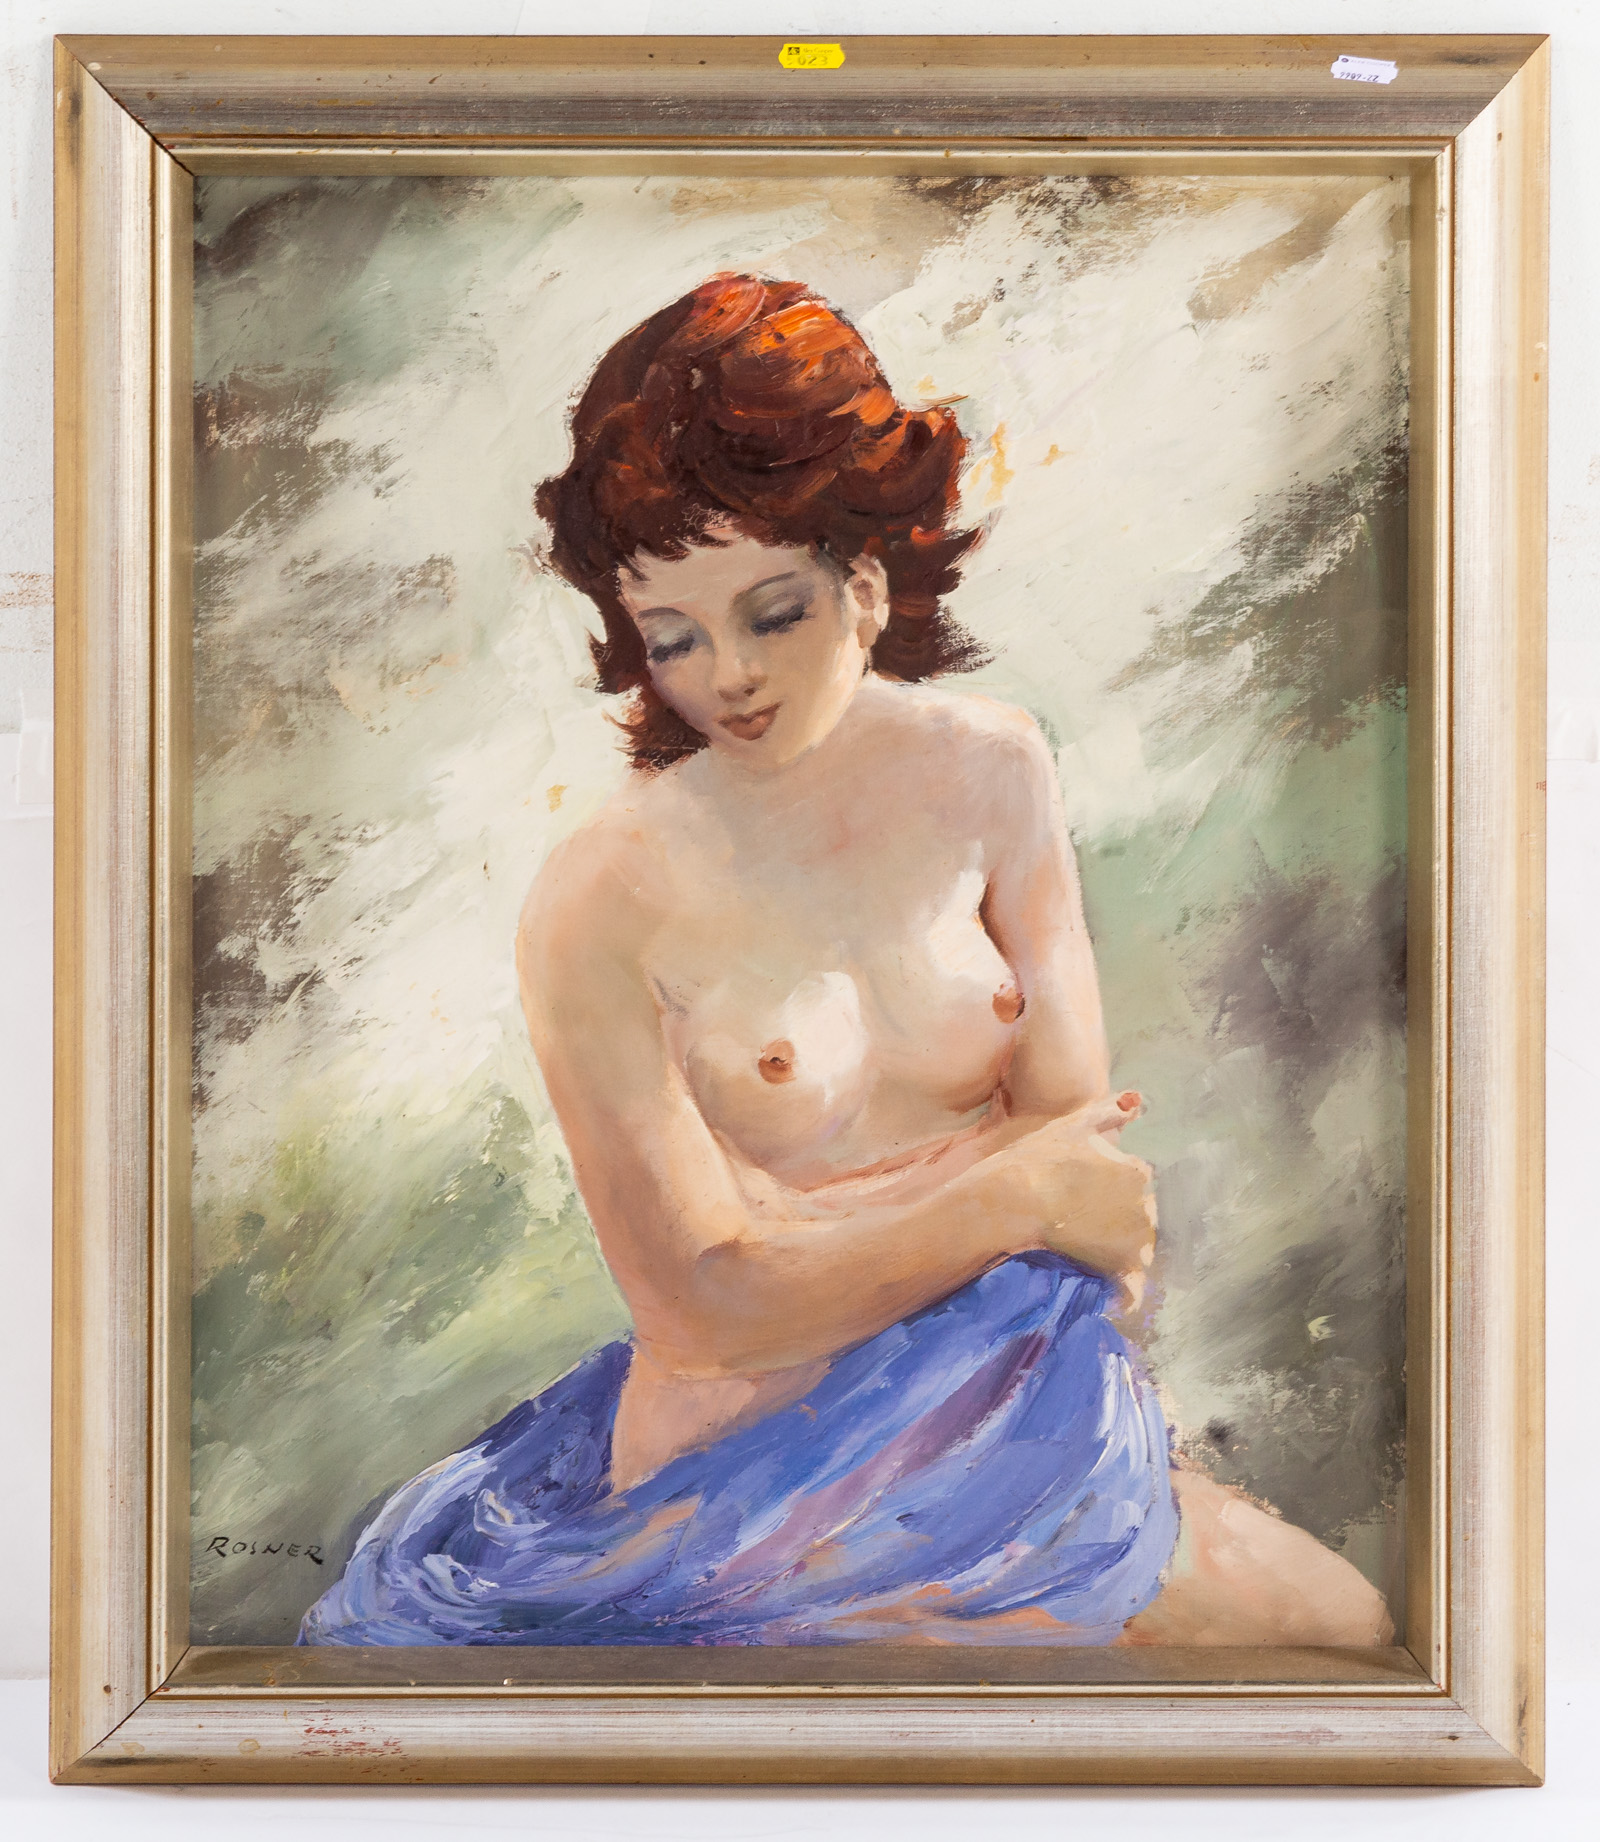 ROSNER NUDE FEMALE STUDY OIL 289a80